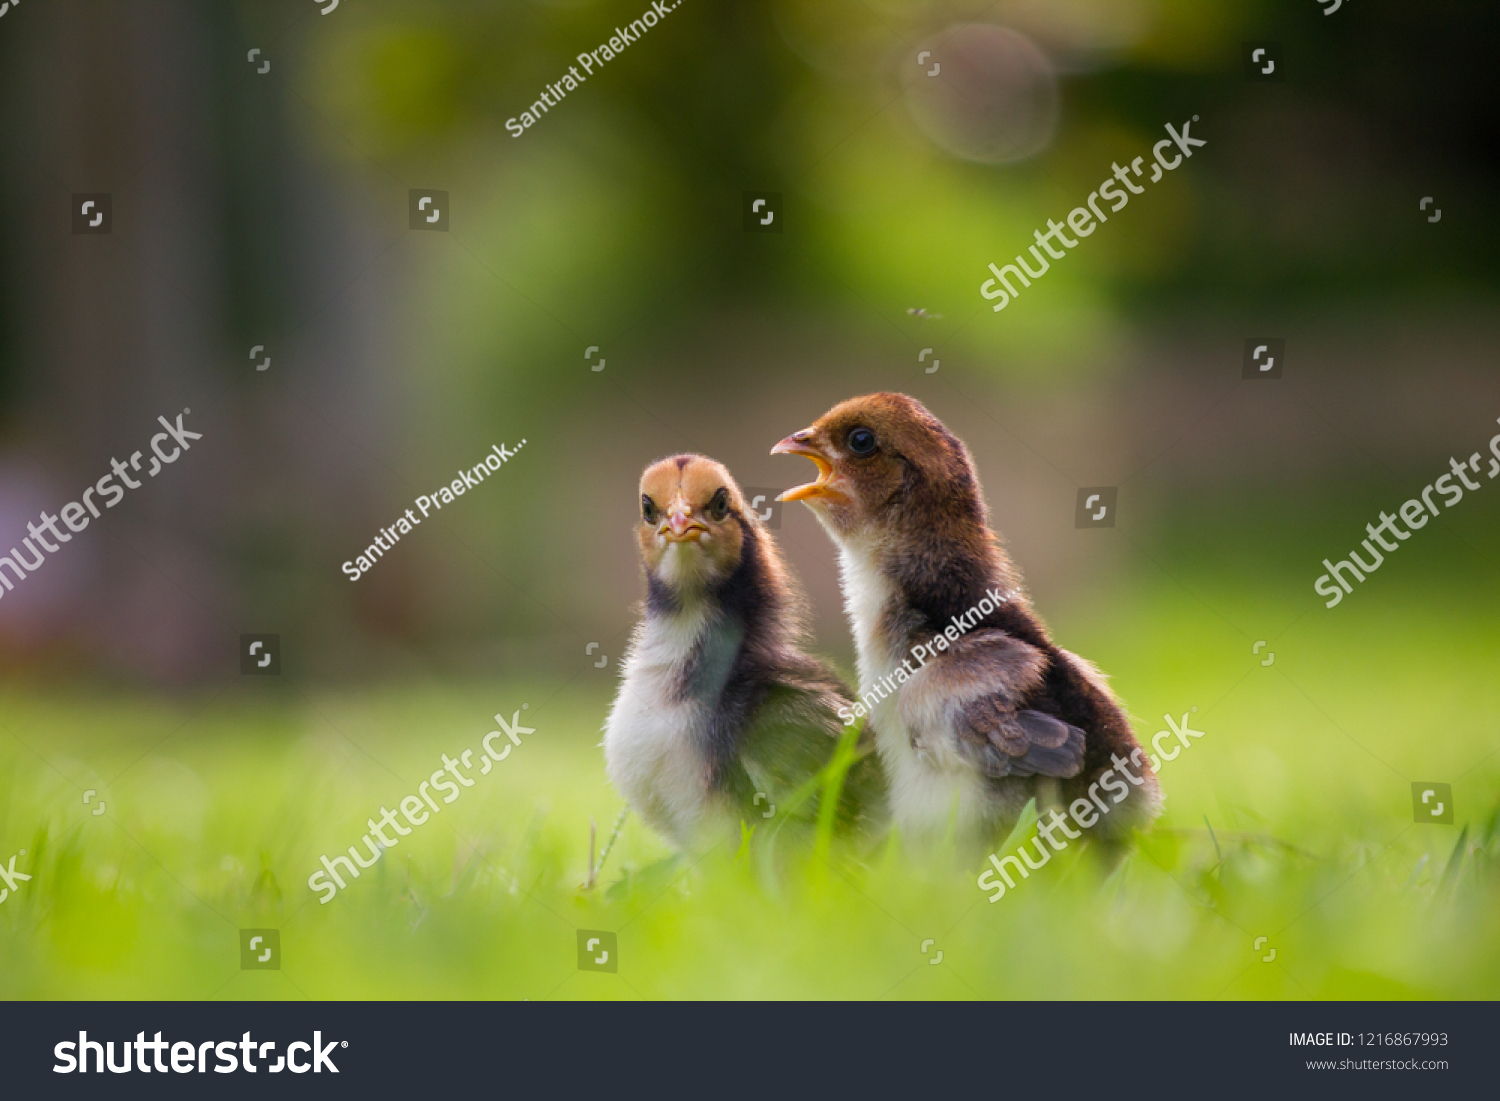 Beautiful and adorable scene of two chicks on grass fields in the farm patterns, Close up two little chickens on grass floor in the farm and on natural background for concept design and decoration #1216867993